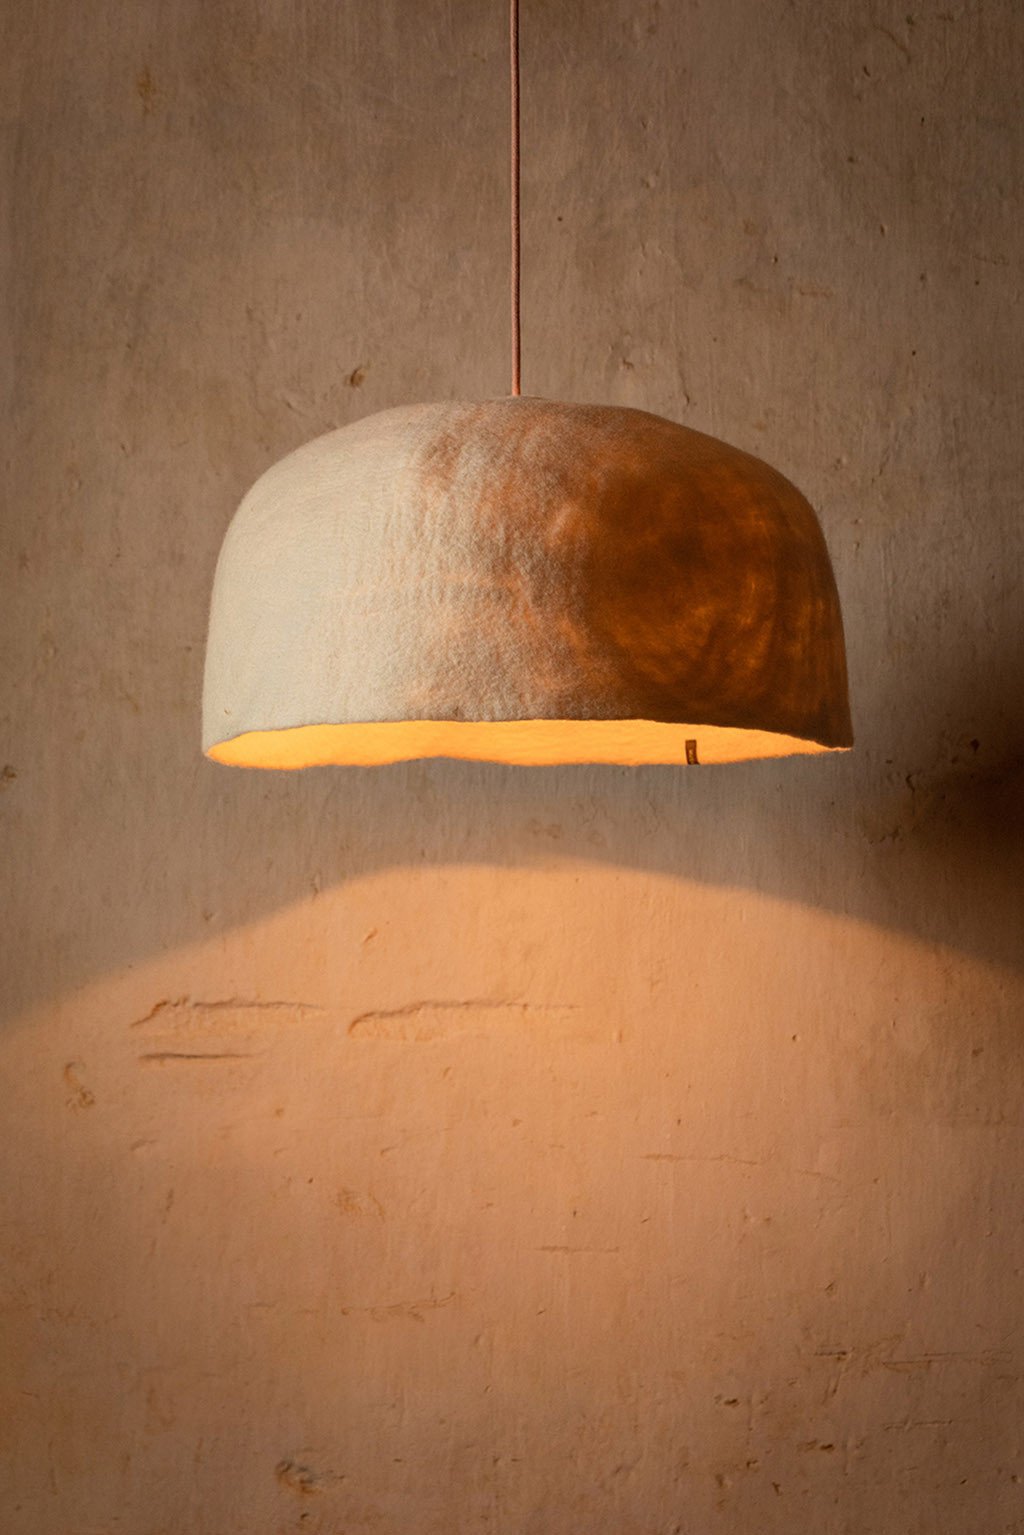 A wool felt lampshade for an authentic interior